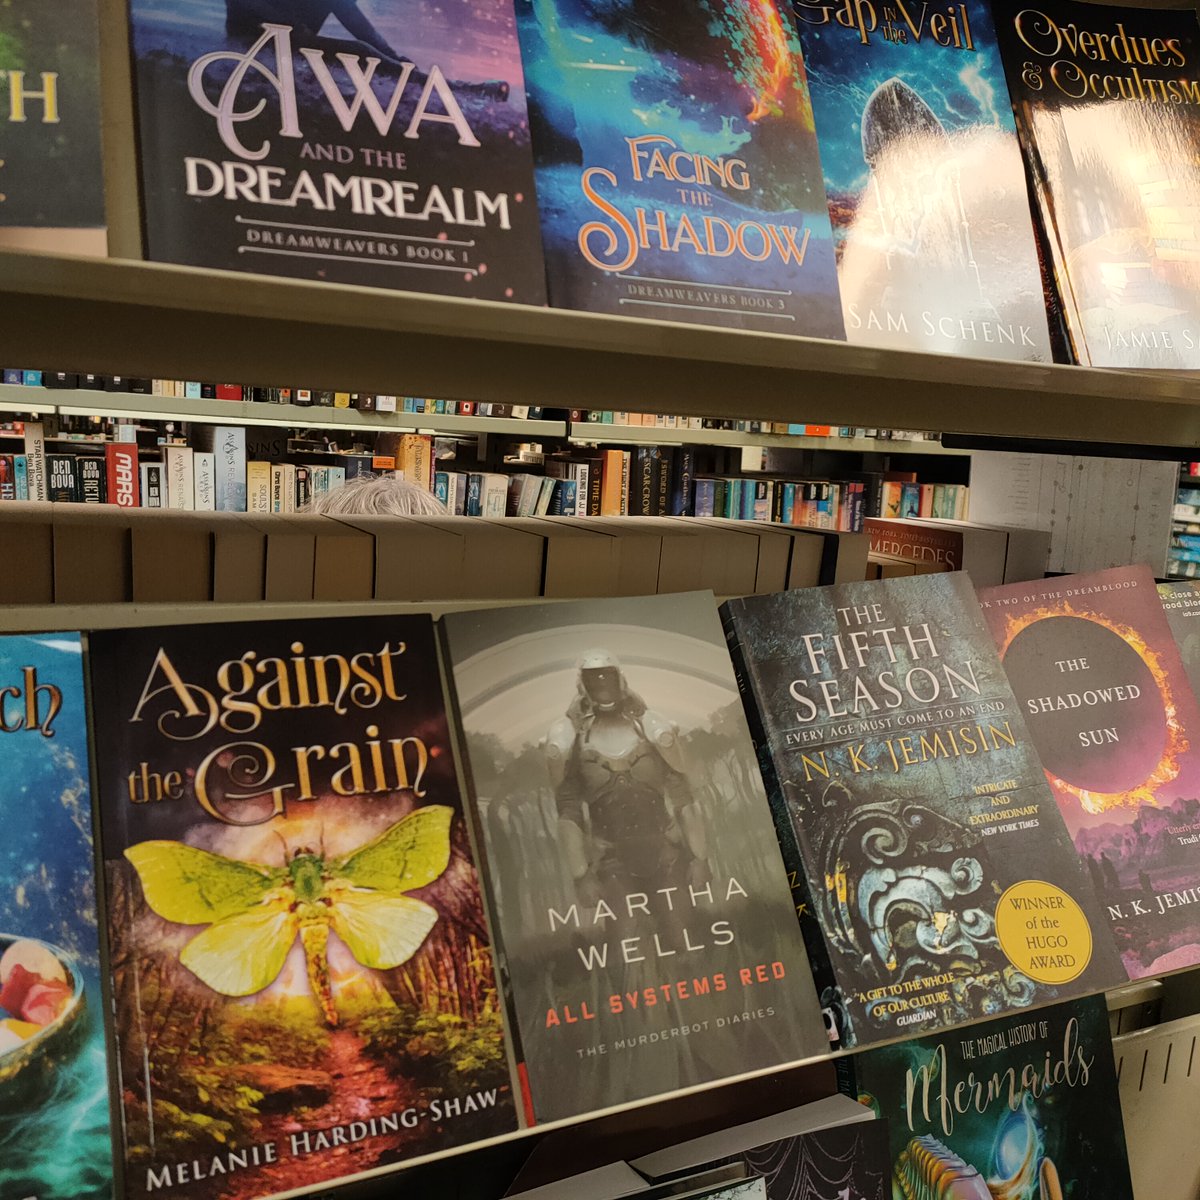 Another great @witchyfiction title on our shelves now #AgainstTheGrain by Melanie Harding-Shaw #BookBuzz #local  🤩